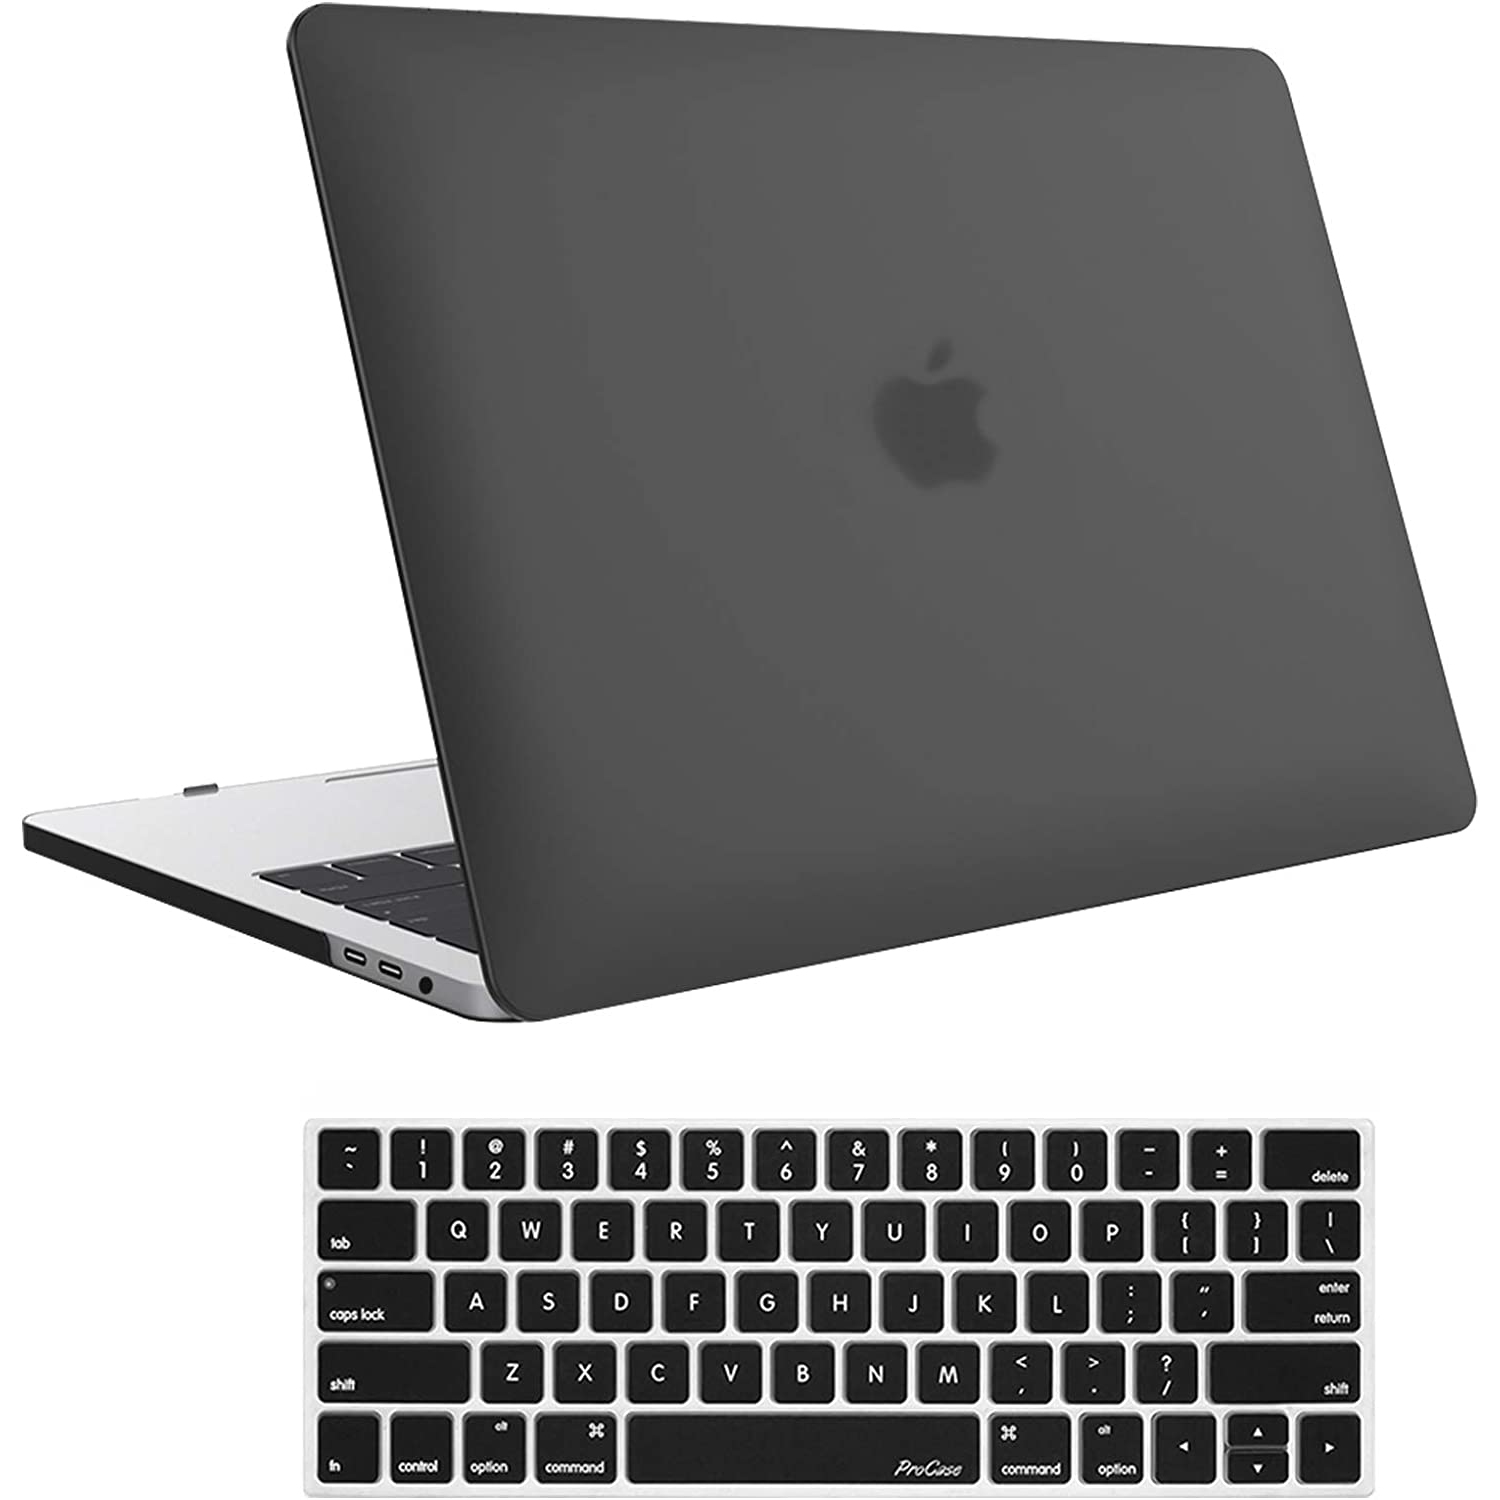 MacBook Pro 15 Case 2019 2018 2017 2016 Release A1990/A1707, Hard Case Shell Cover and Keyboard Cover for Apple MacBook Pro 15' (2019/2018/2017/2016) with Touch Bar and Tou